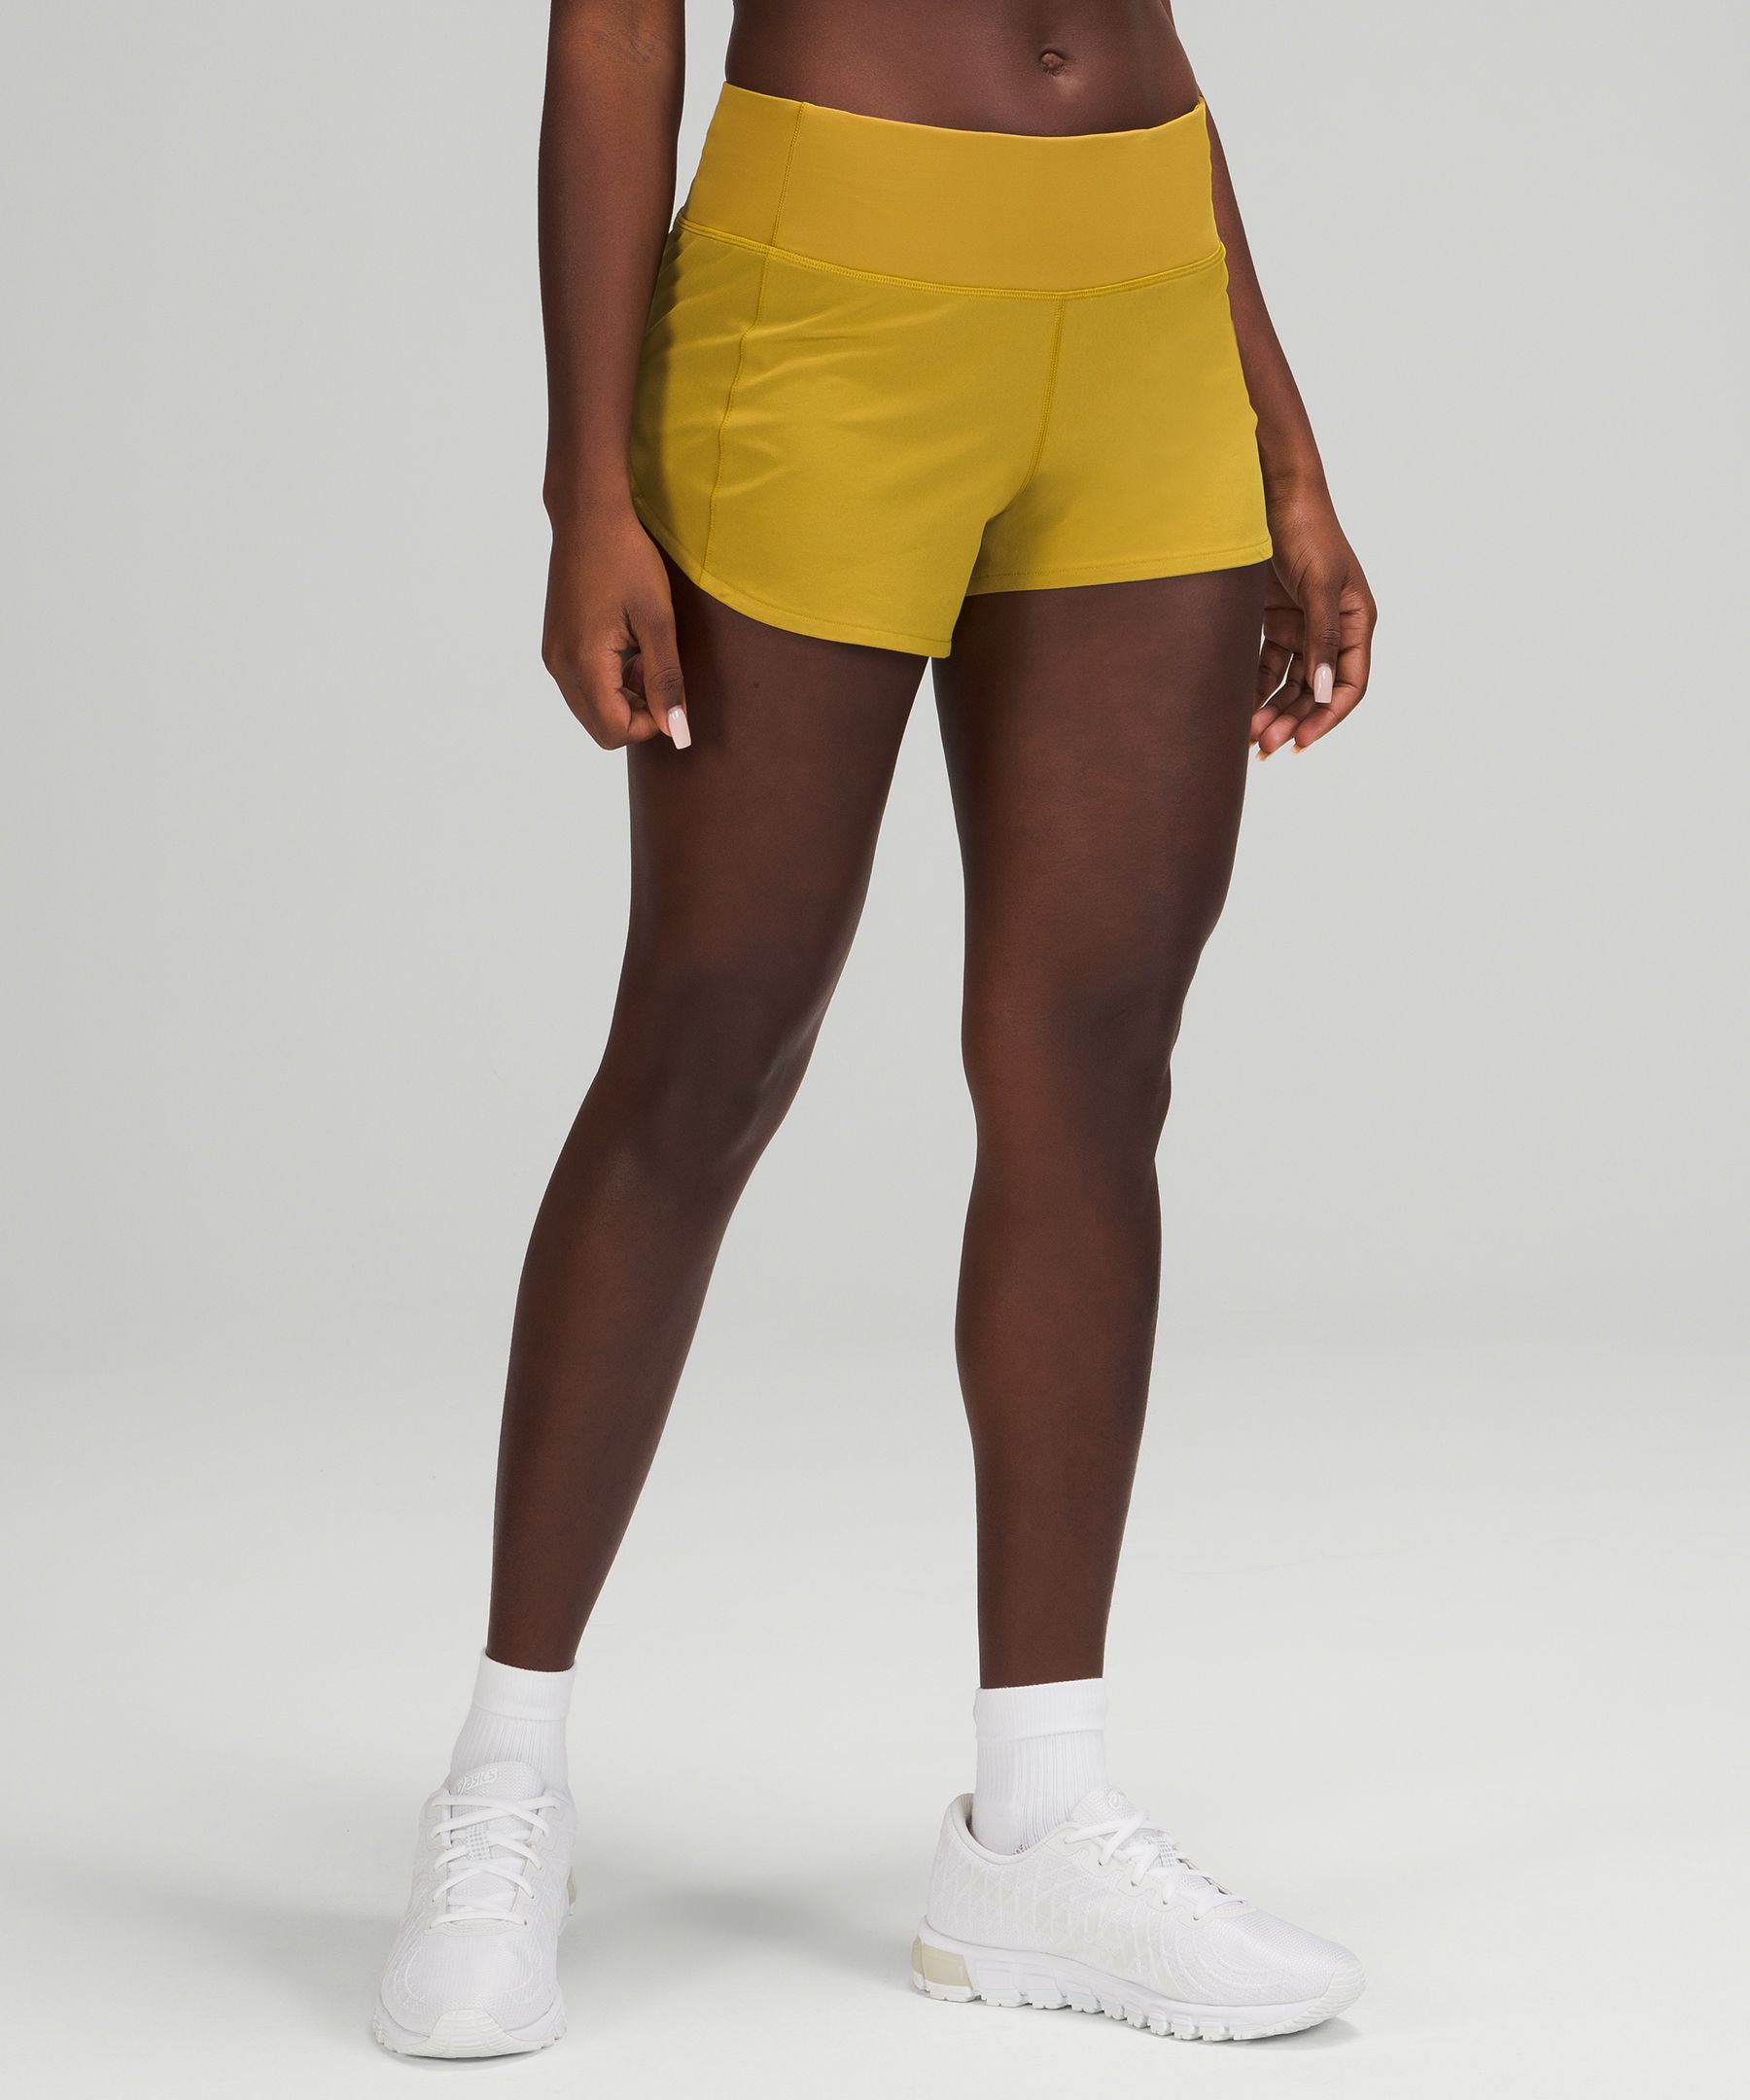 Lululemon Speed Up Mid-rise Lined Shorts 4" In Auric Gold